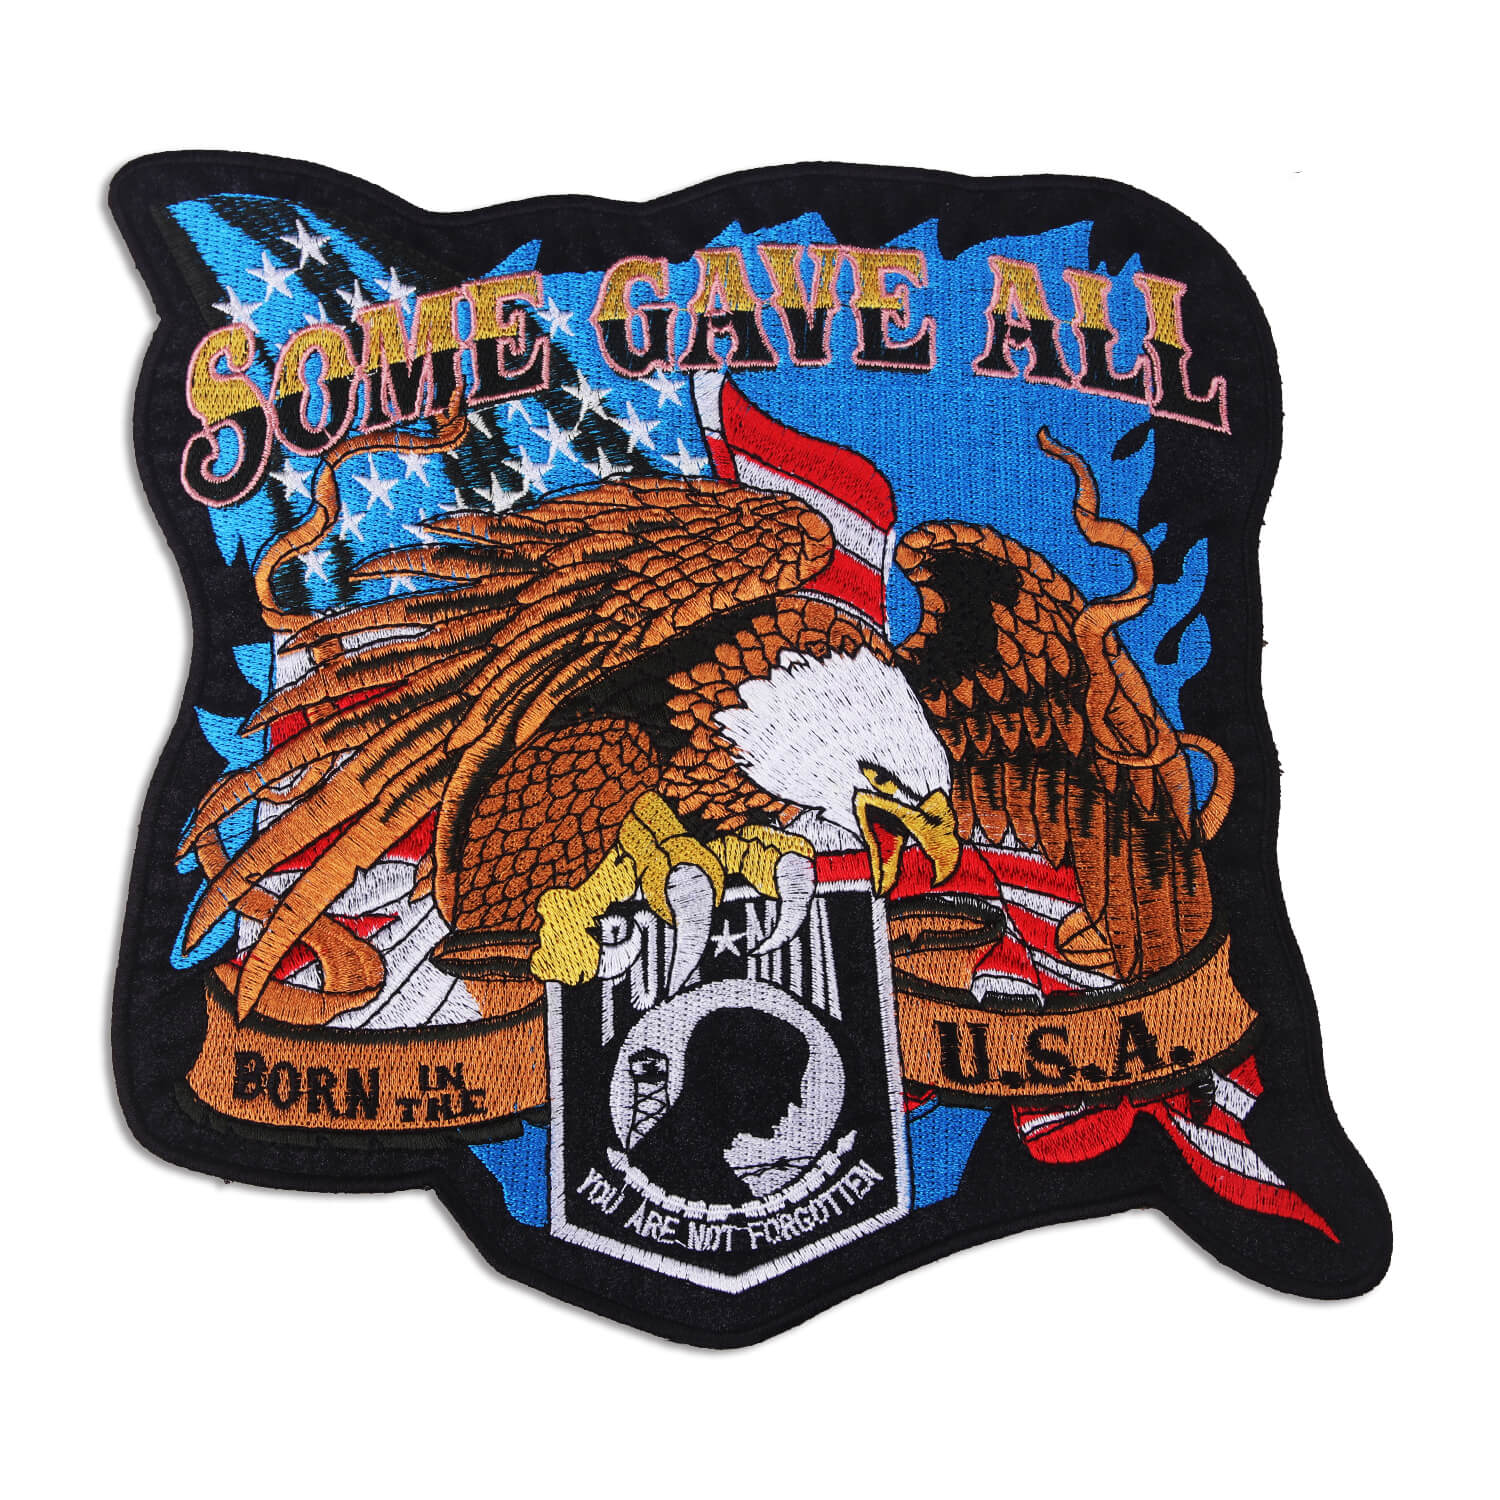 Some Gave All POW/MIA patch